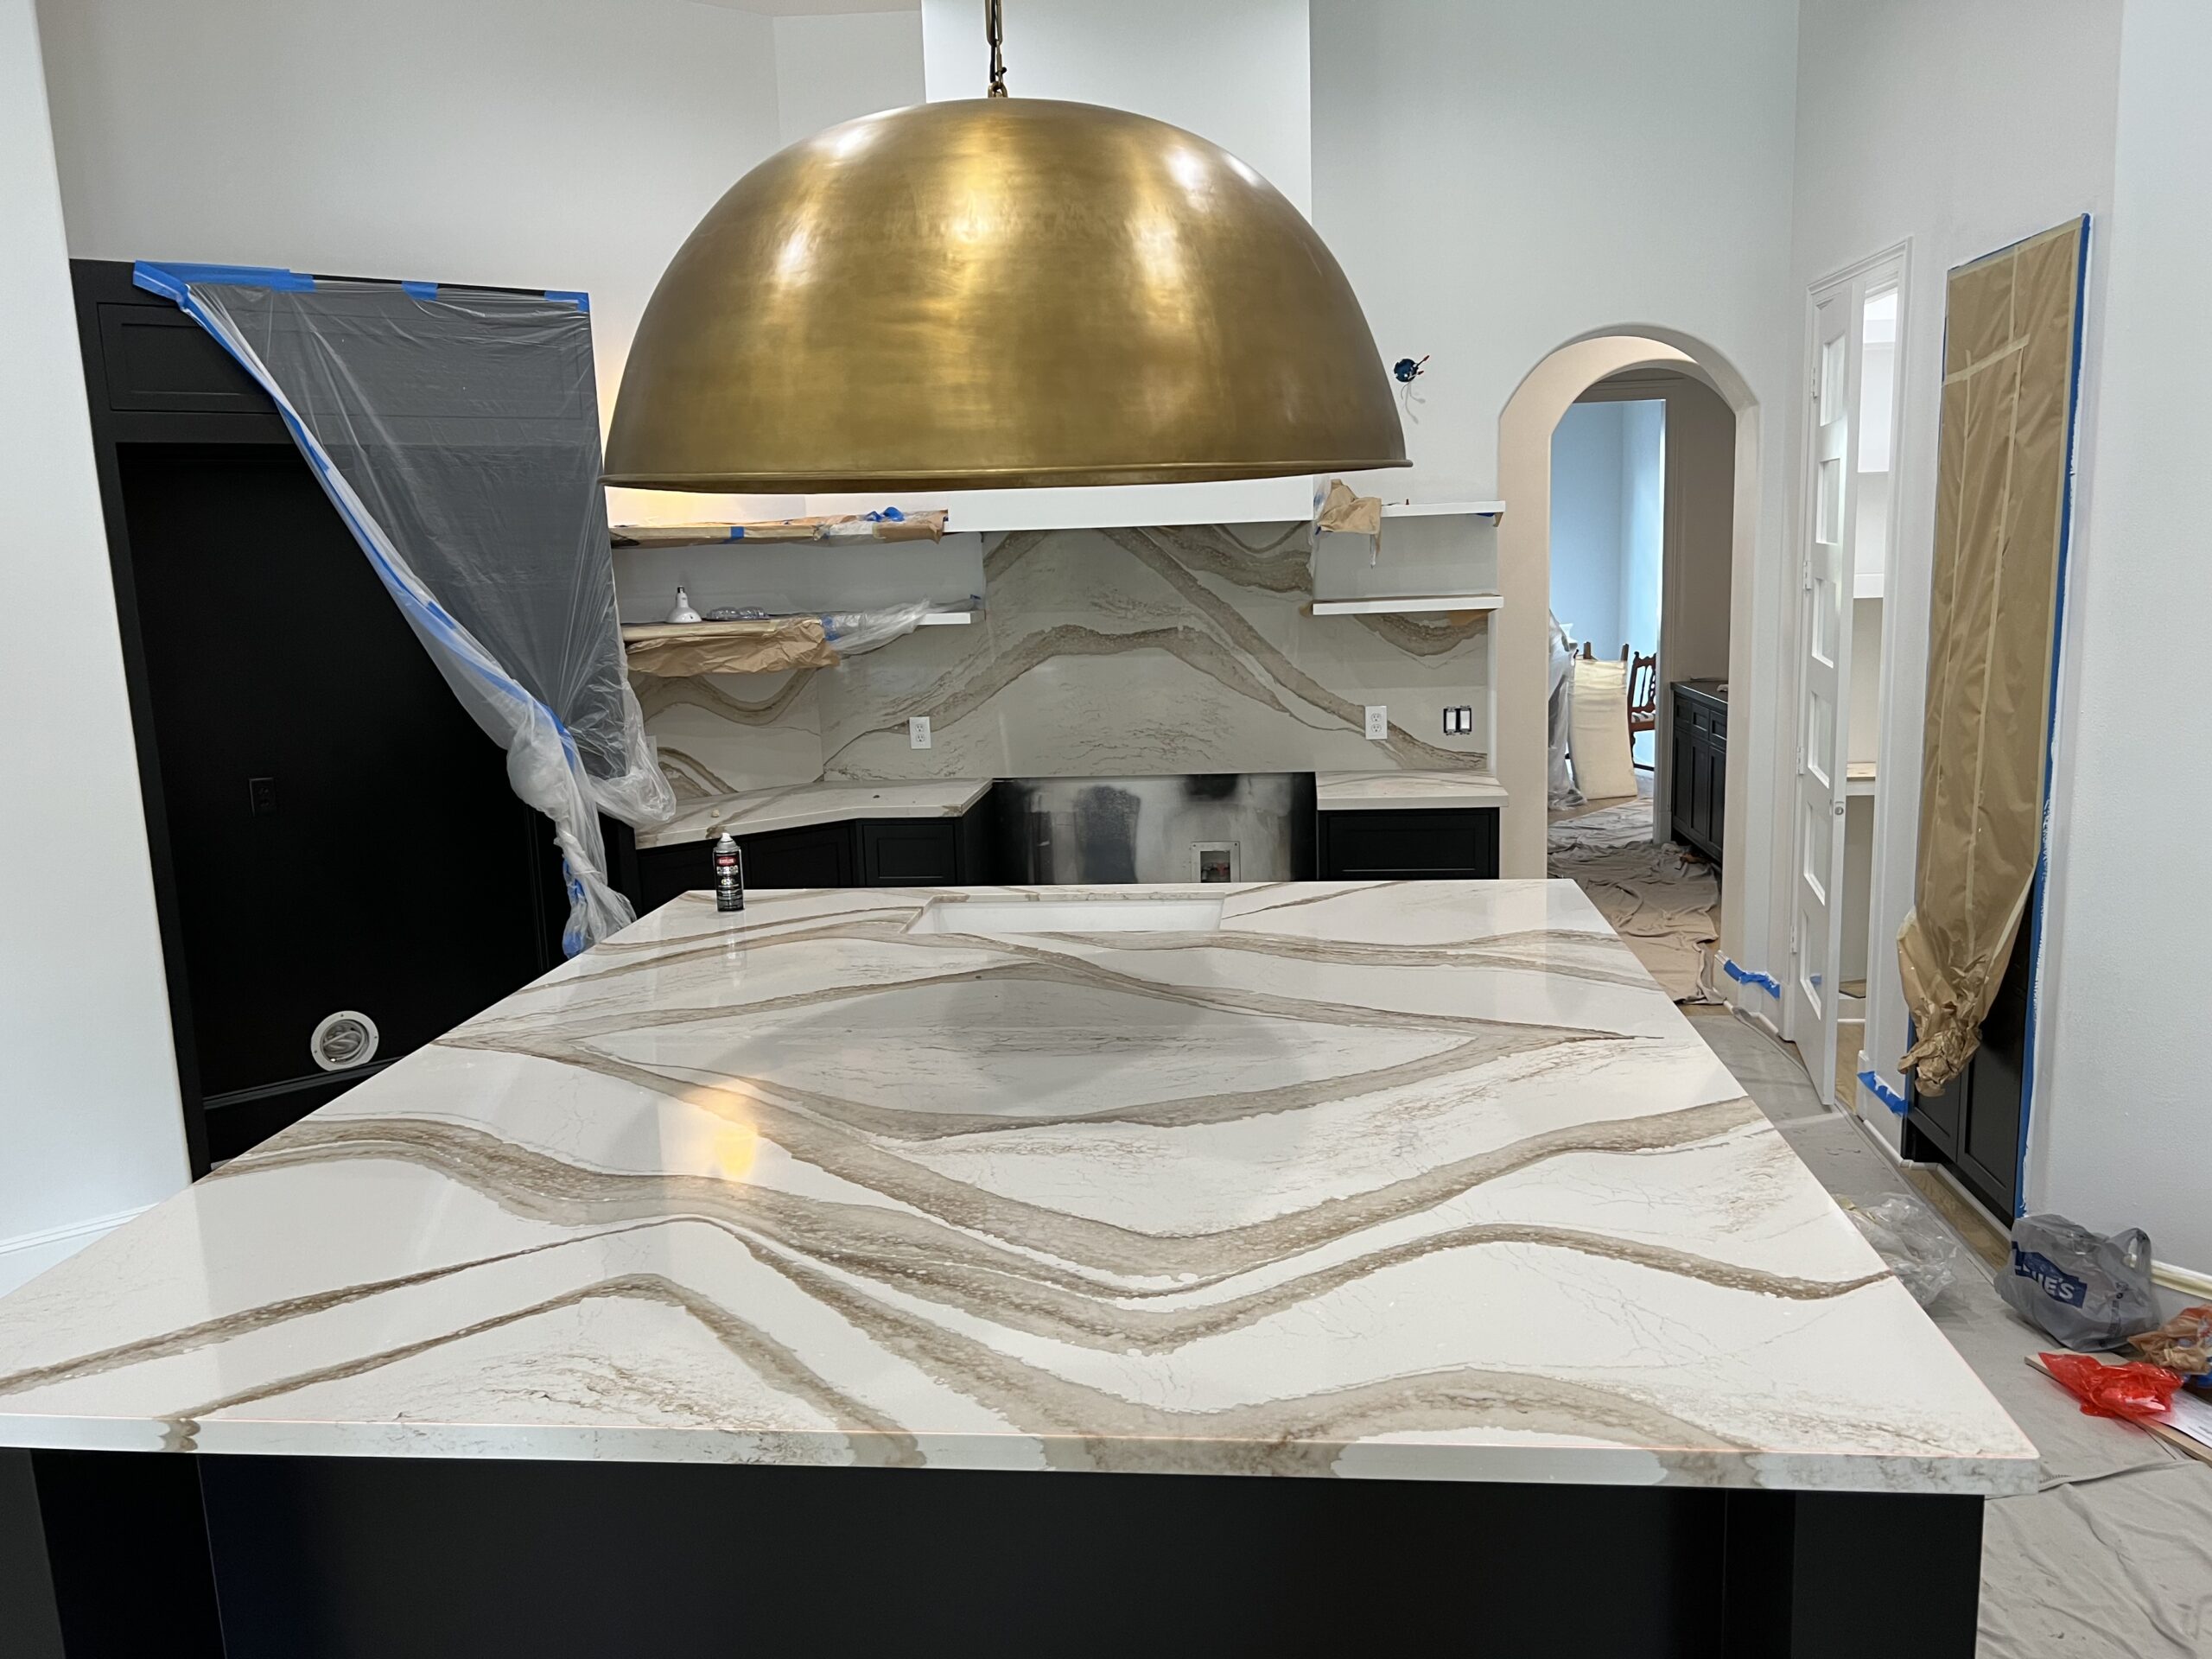 A kitchen counter with white and gold lining